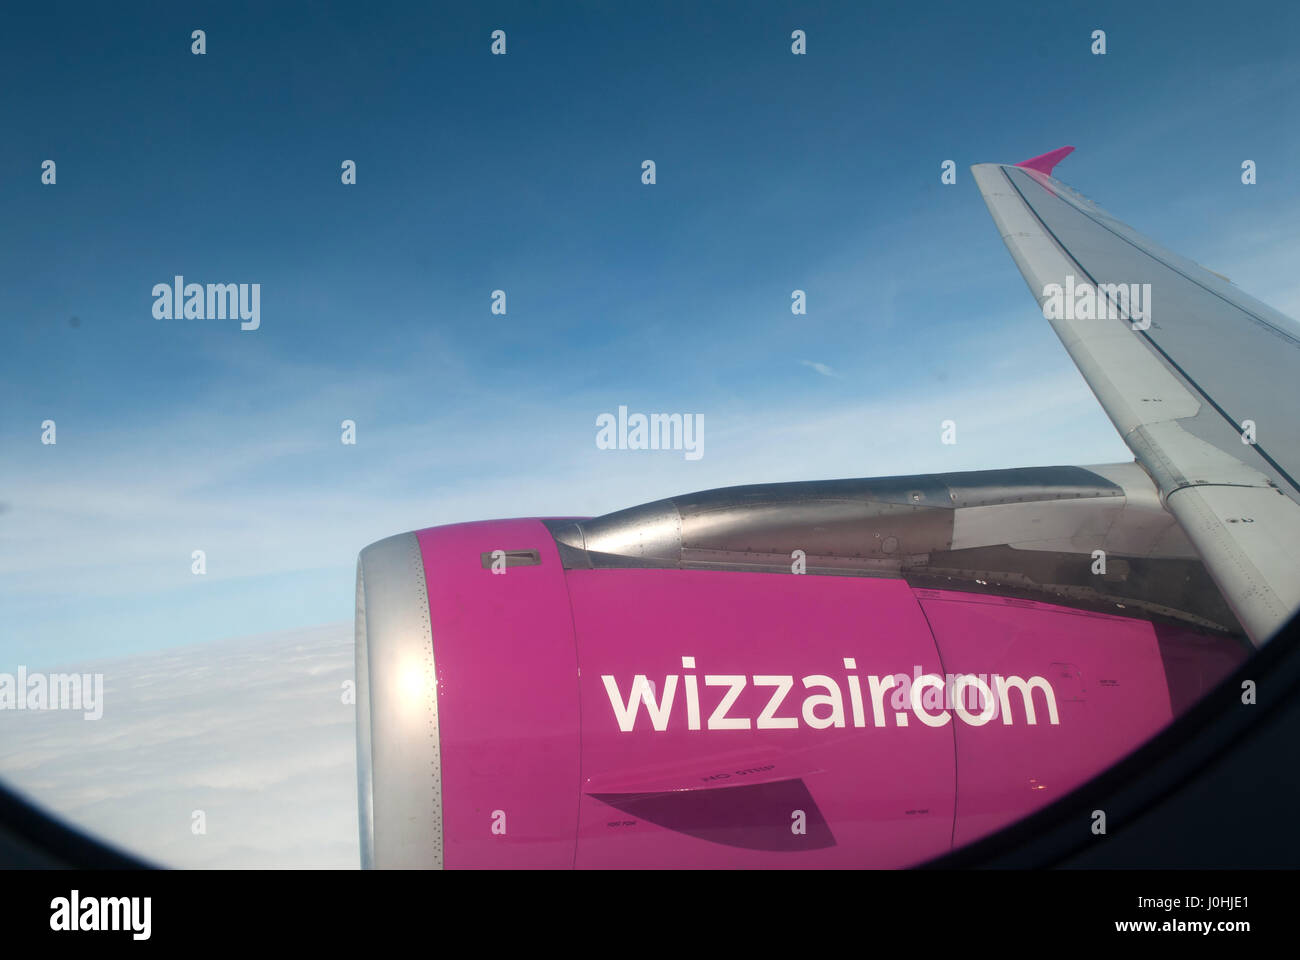 Wizzair.com logo Wizz Air Airplane Flying 2017 2010s HOMER SYKES Foto Stock